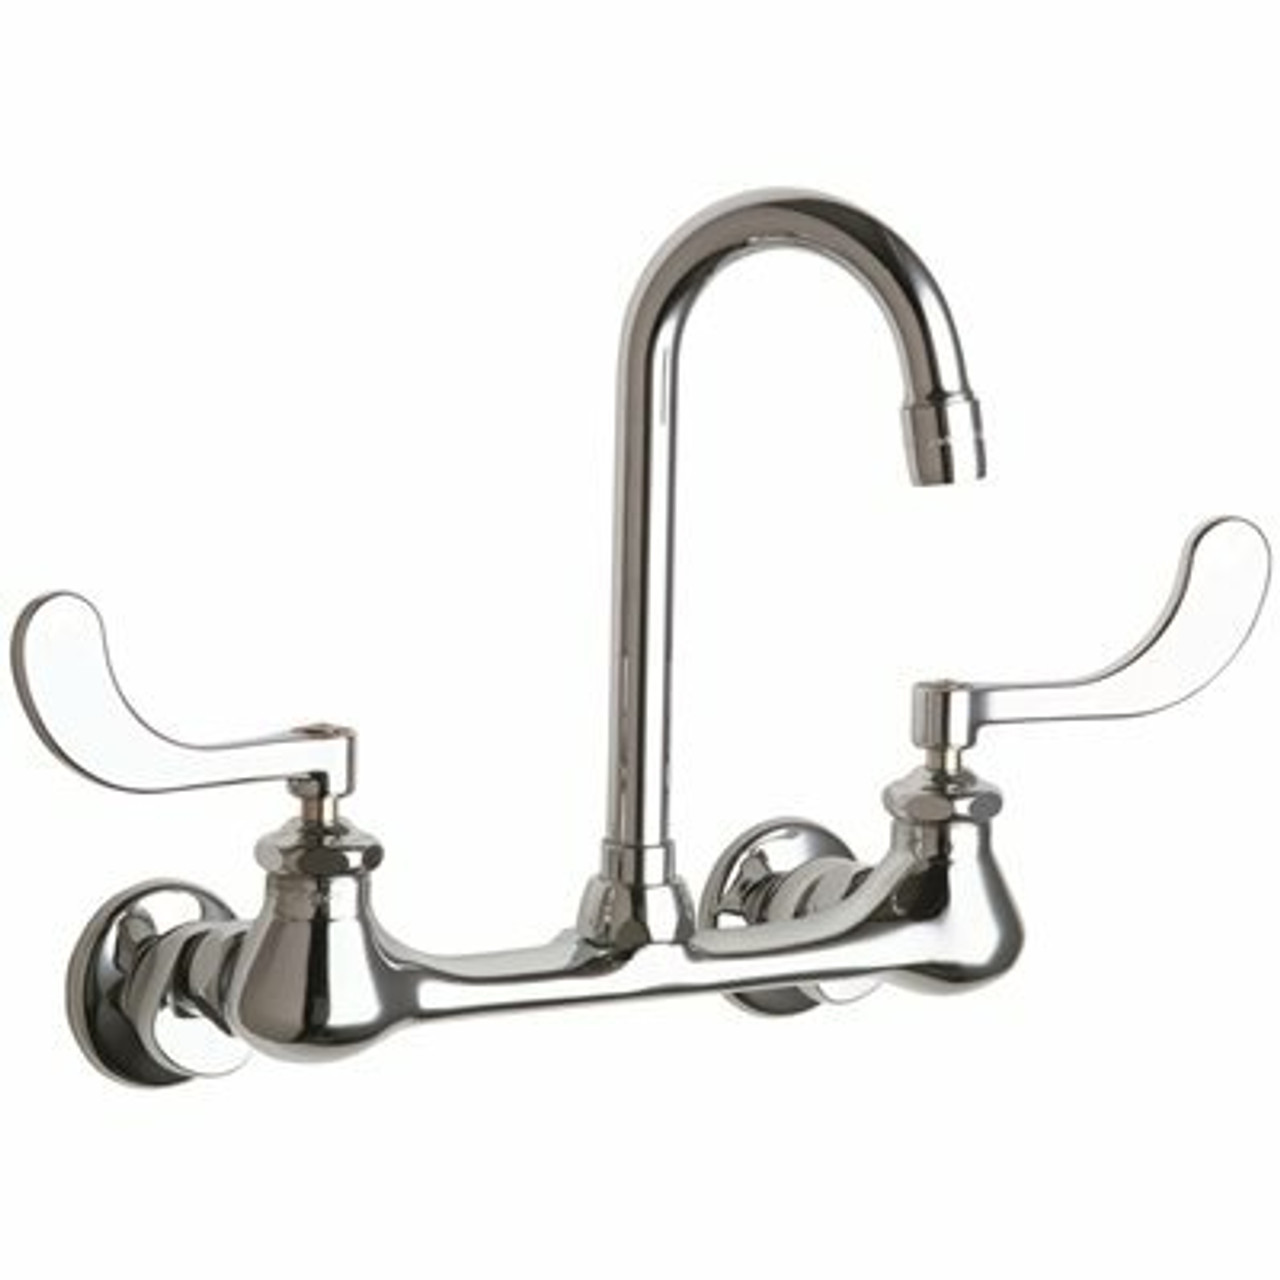 Chicago Faucets 2-Handle Kitchen Faucet In Chrome With 3-1/2 In. Rigid/Swing Gooseneck Spout